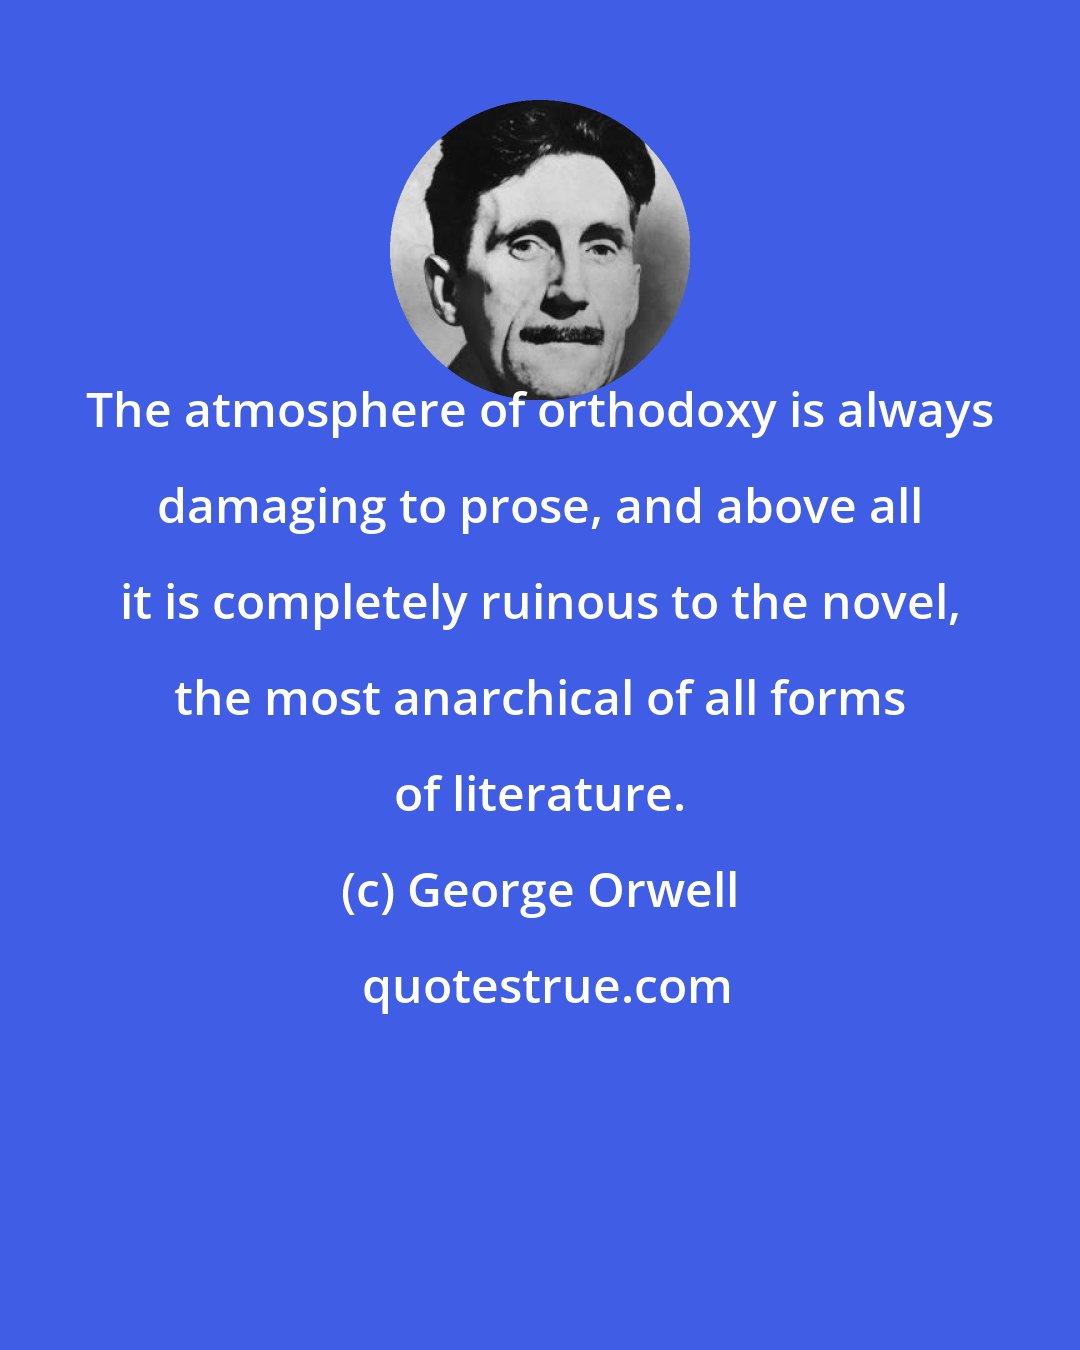 George Orwell: The atmosphere of orthodoxy is always damaging to prose, and above all it is completely ruinous to the novel, the most anarchical of all forms of literature.